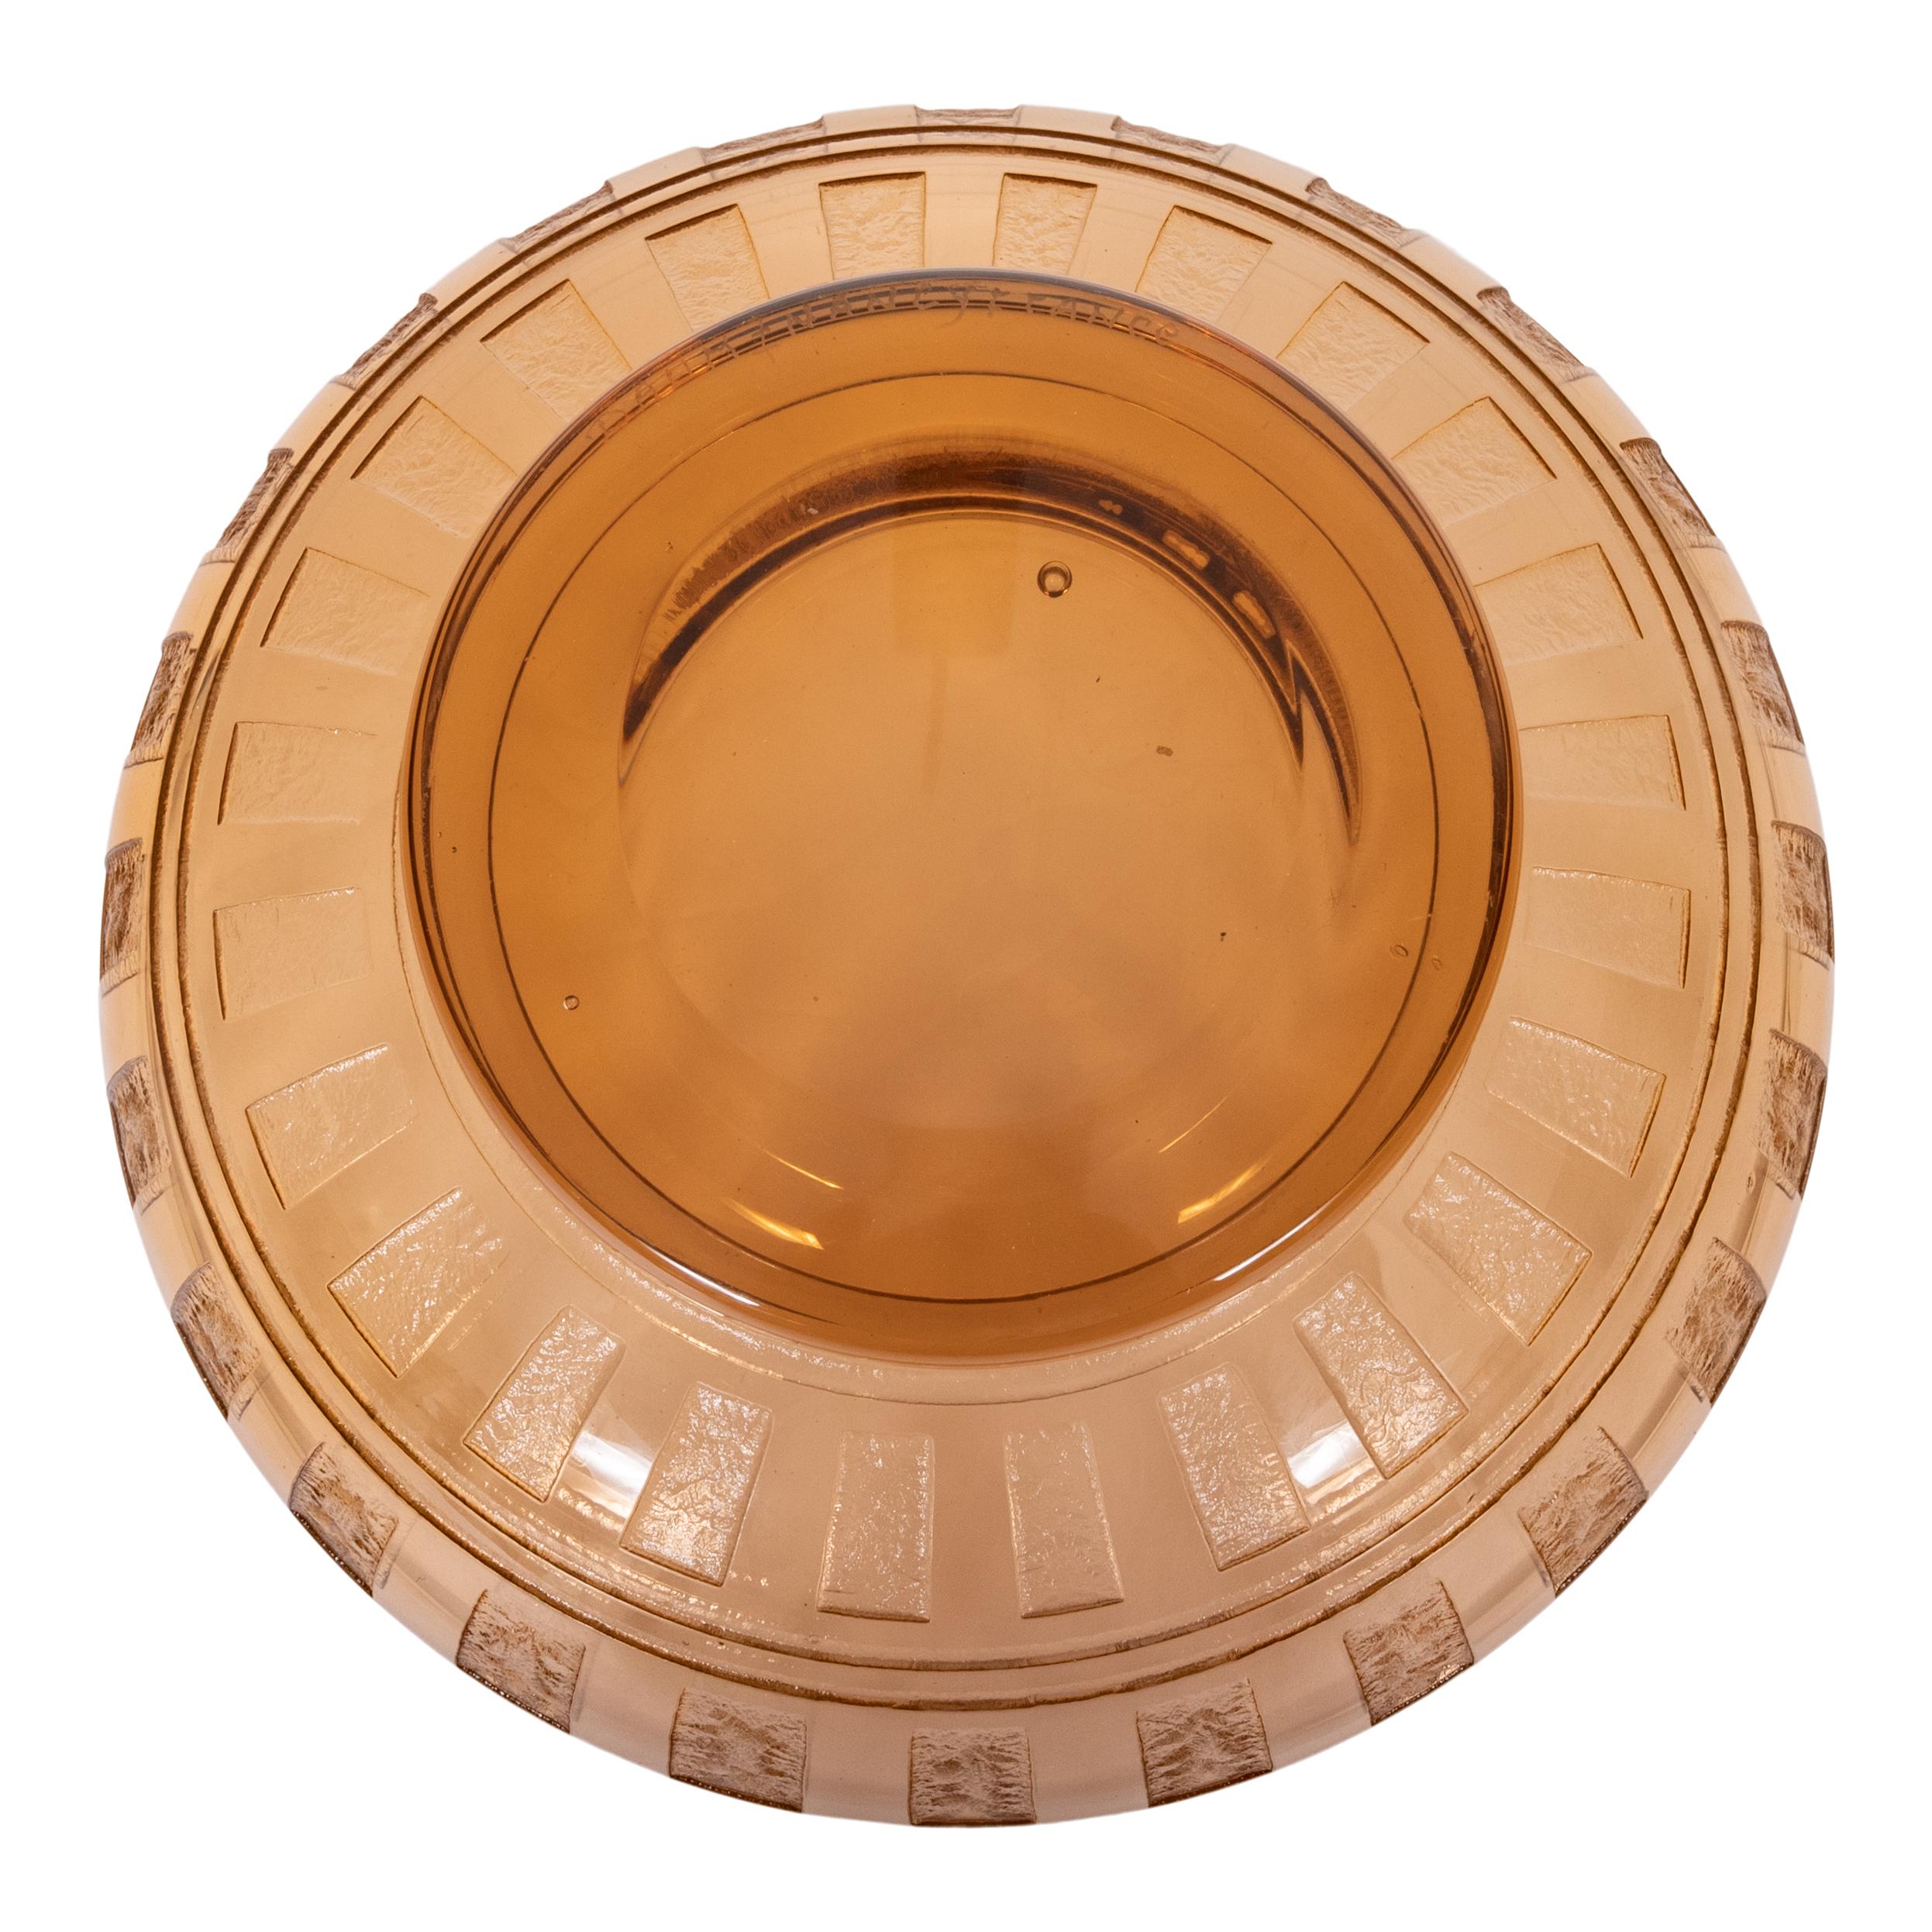 Early 20th Century Antique French Art Deco Etched & Engraved Smoked Peach Glass Bowl by Daum, 1920 For Sale